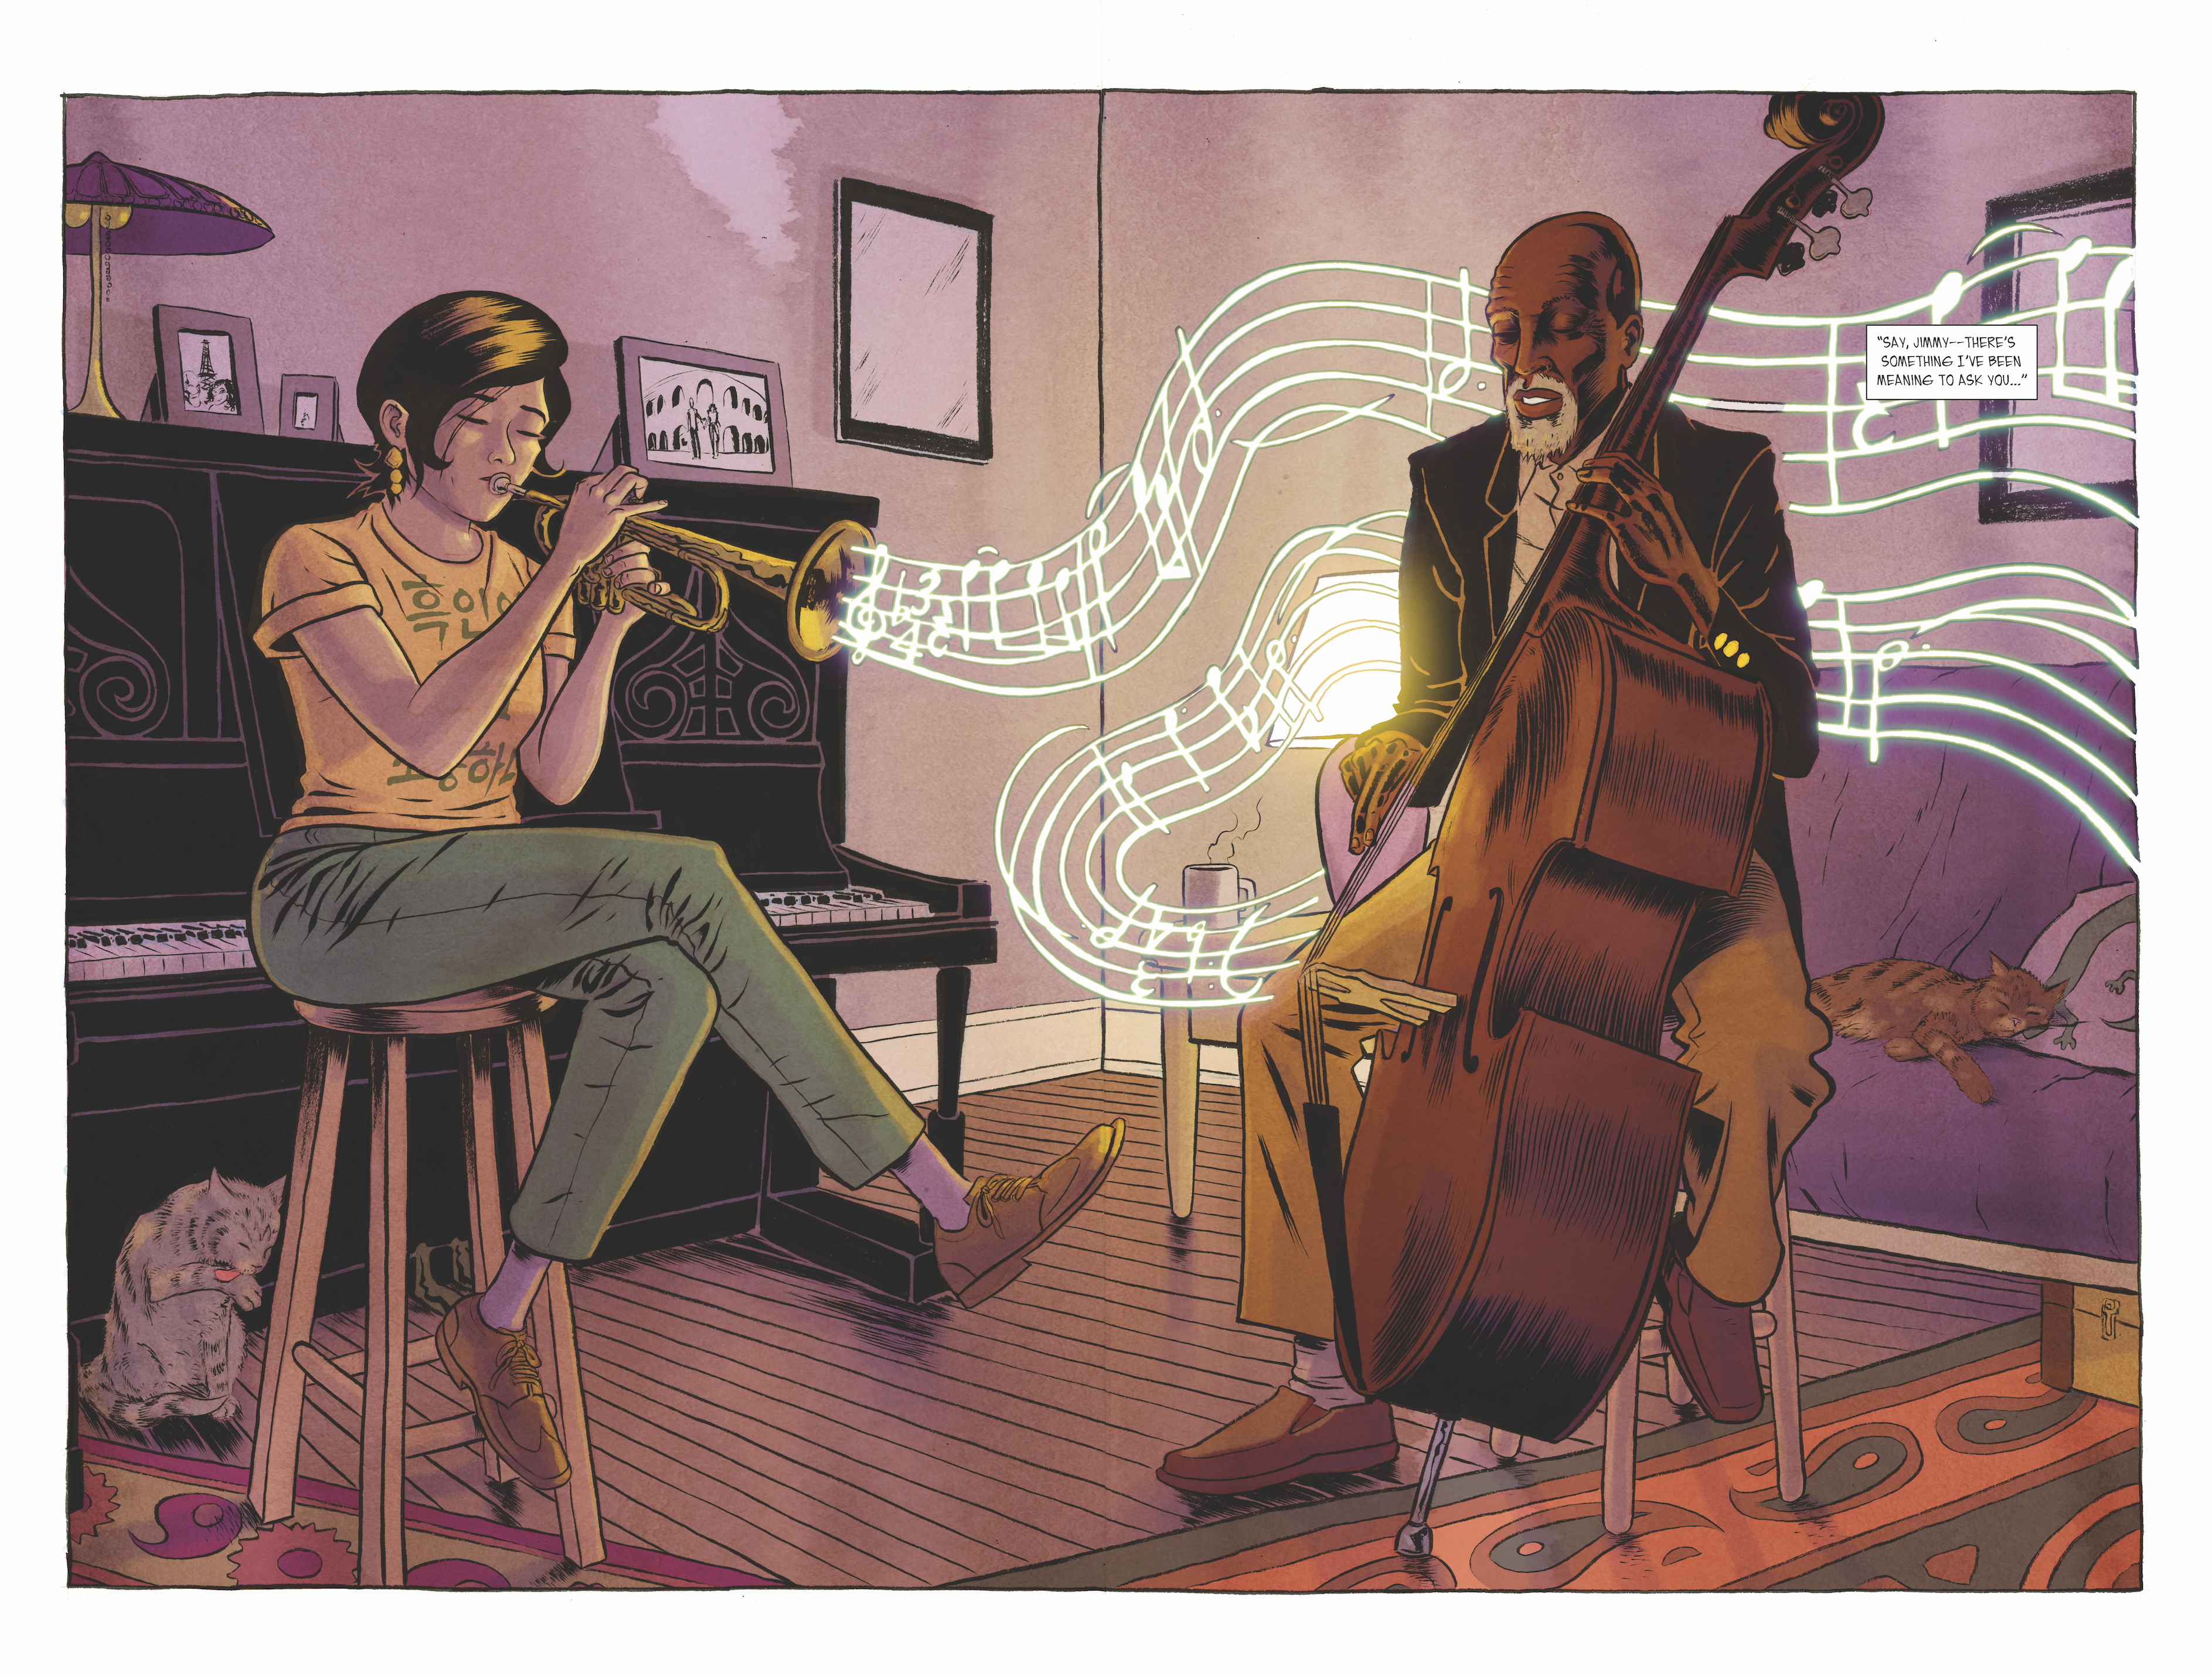 Two page spread featuring Sam and Jimmy playing music together